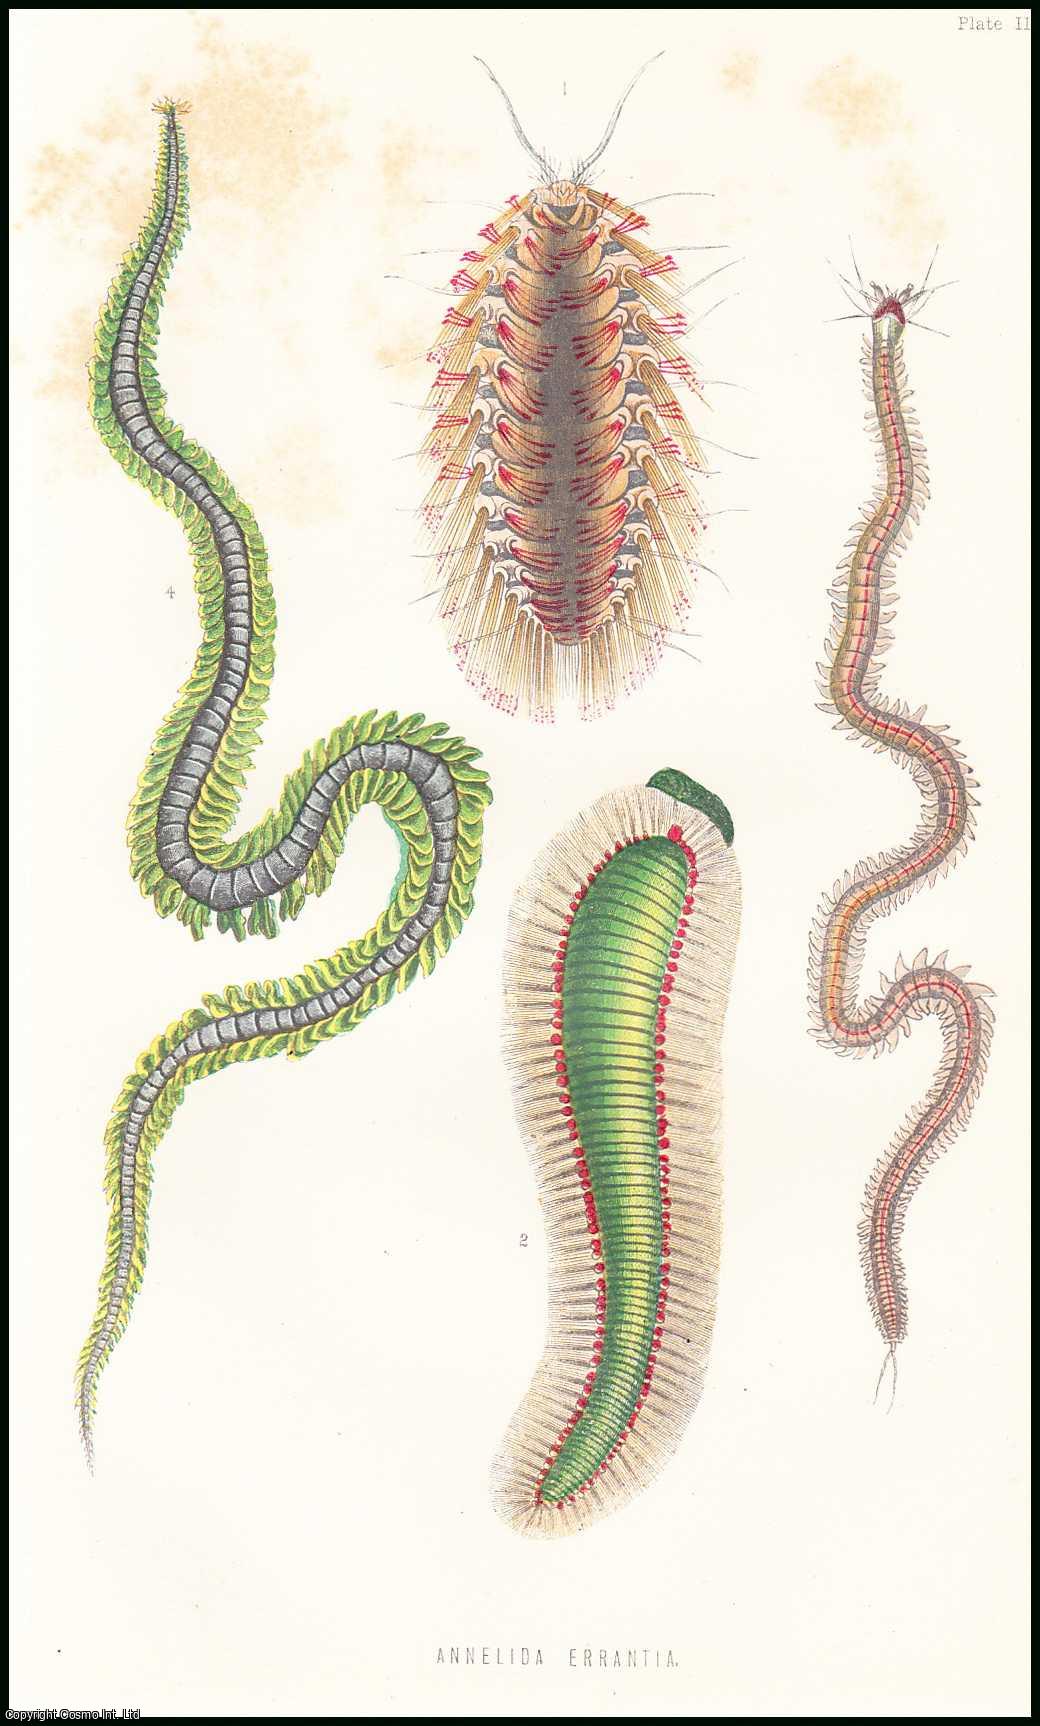 W. Baird, M.D., F.R.S., F.L.S. - Errantia (part 1) : The Annelidan Worms, or Annelides (Annelida). An uncommon original article from the Student and Intellectual Observer of Science Literature & Art, 1869.